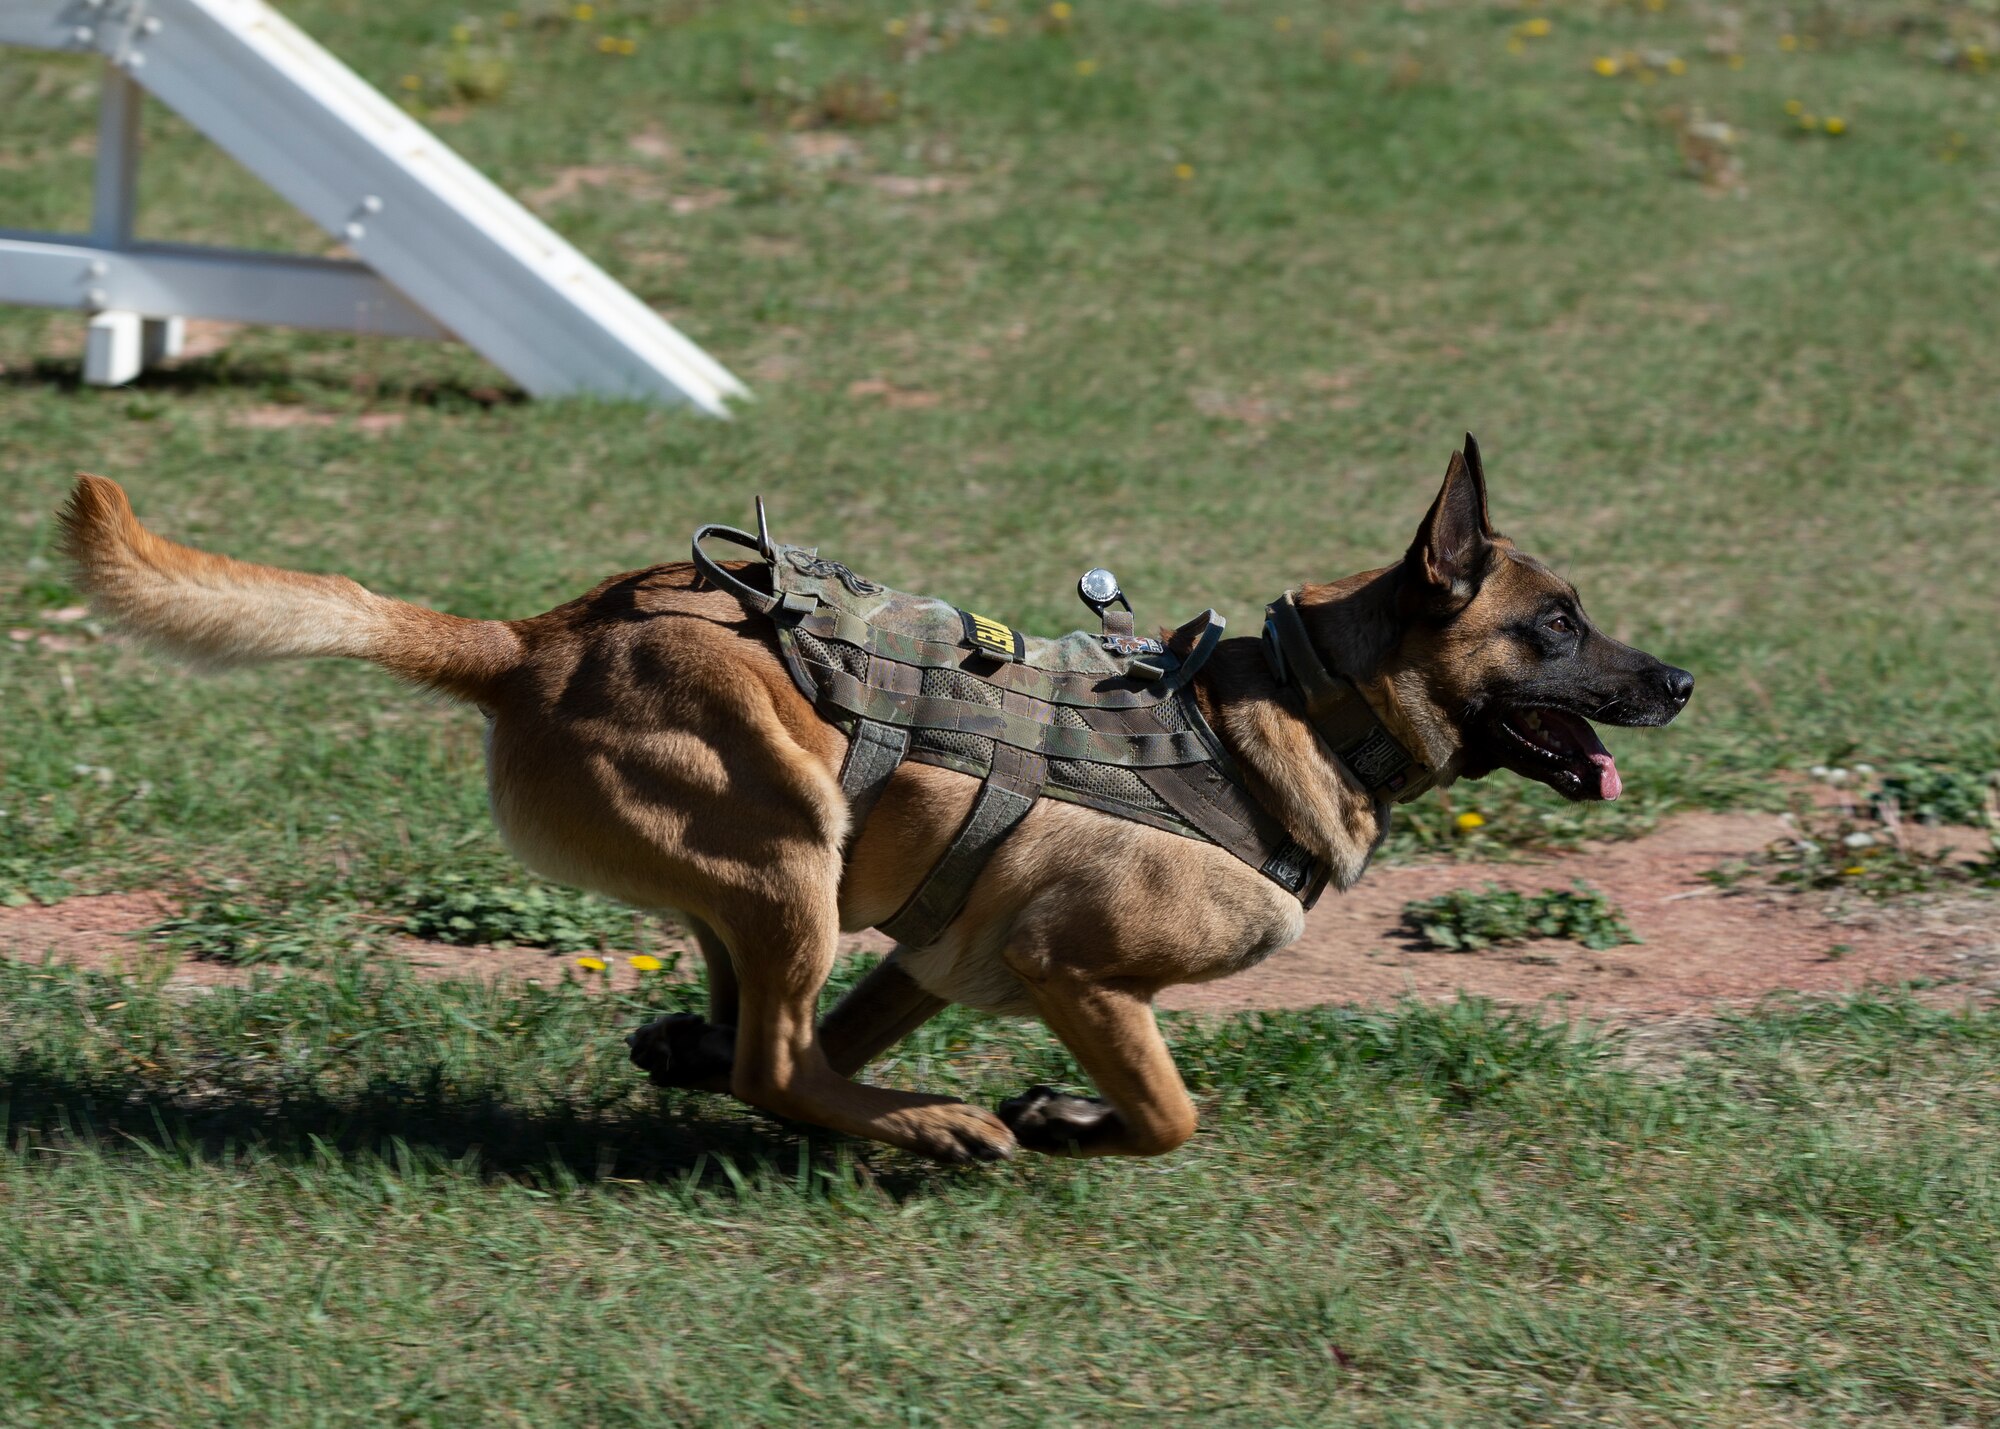 Dak, a 366th Security Forces Squadron K-9, charges a decoy during a working dog competition between the Meridian Police Department and the 366th Security Forces Squadron.